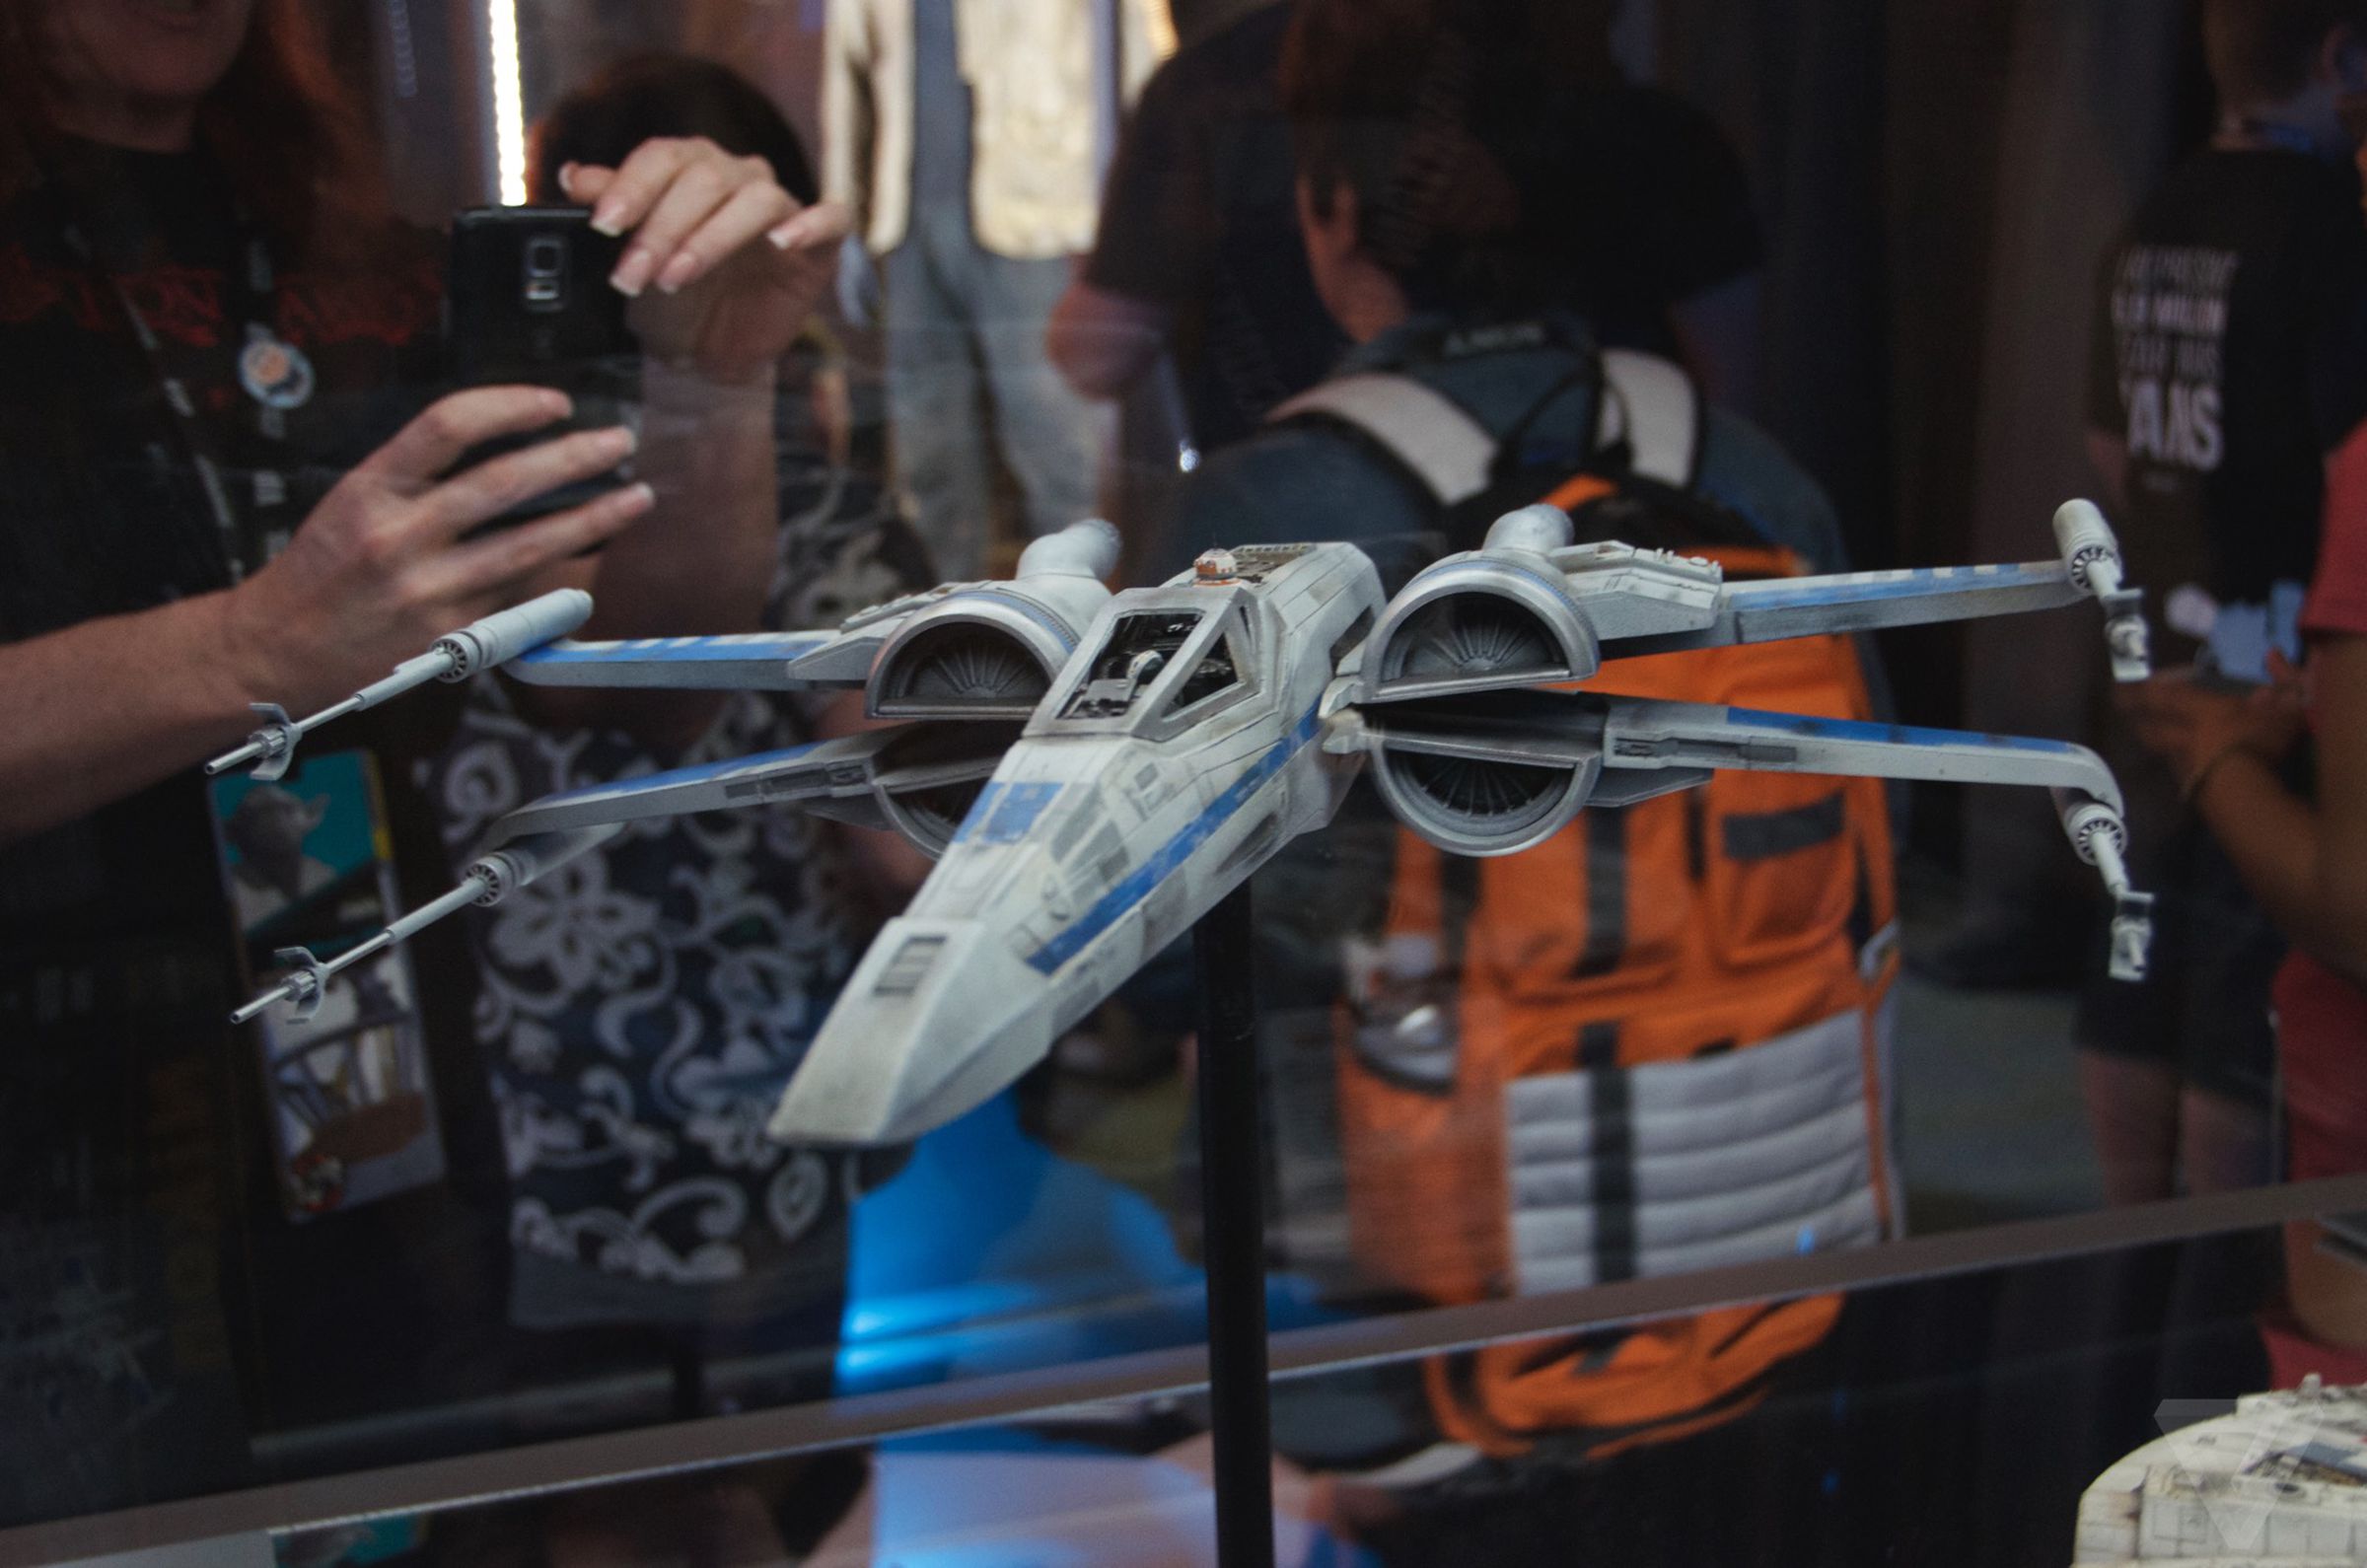 Star Wars: The Force Awakens exhibit images